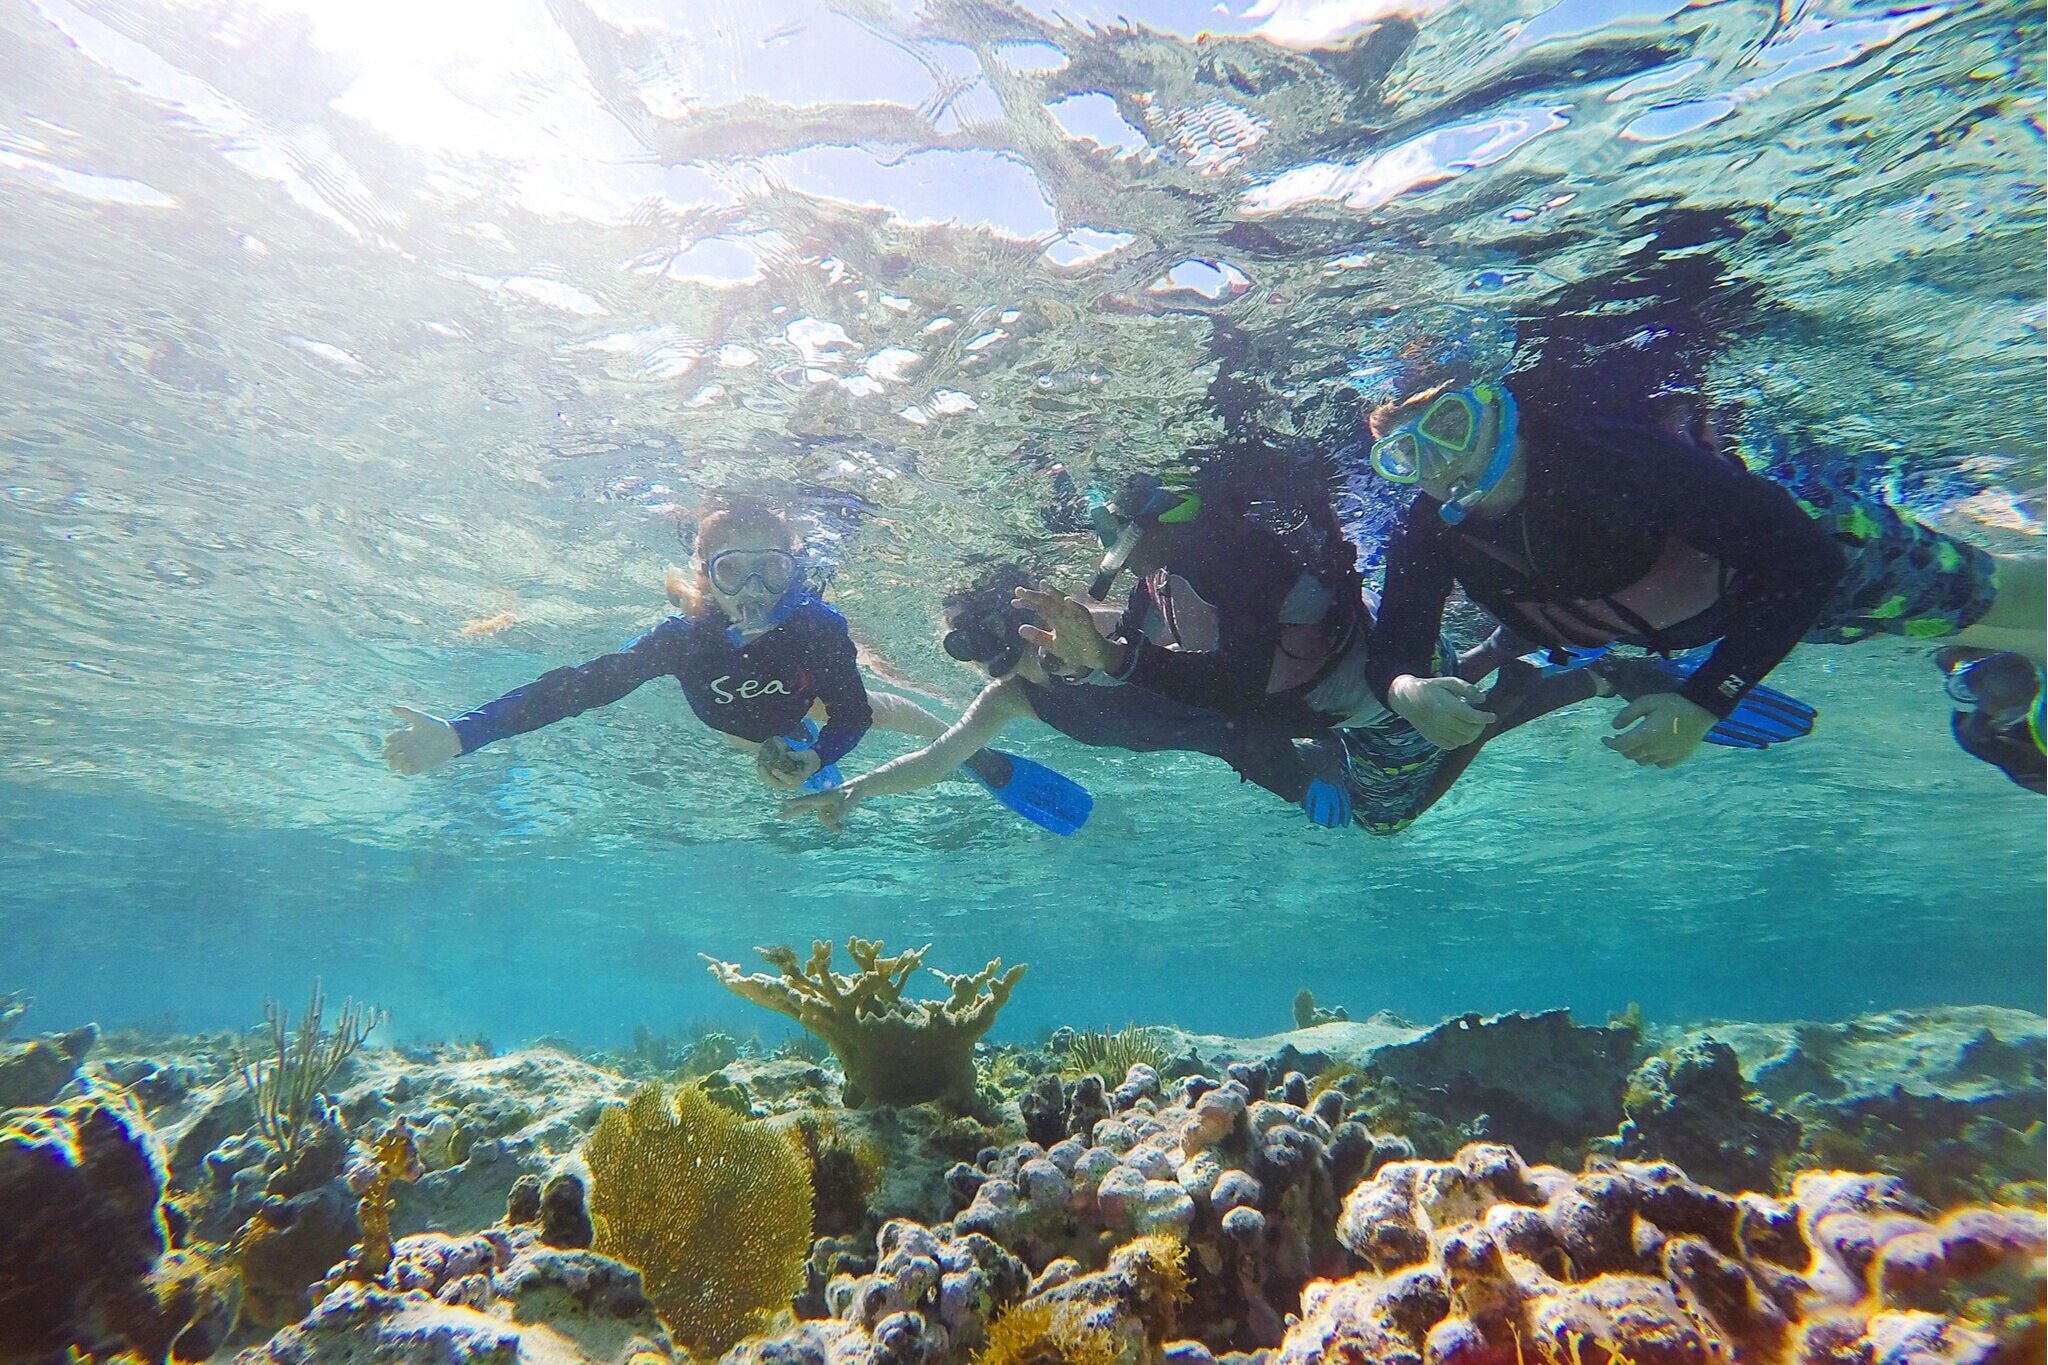 Students snorkeled at Lighthouse Beach, visiting corals and practicing their fish ID.